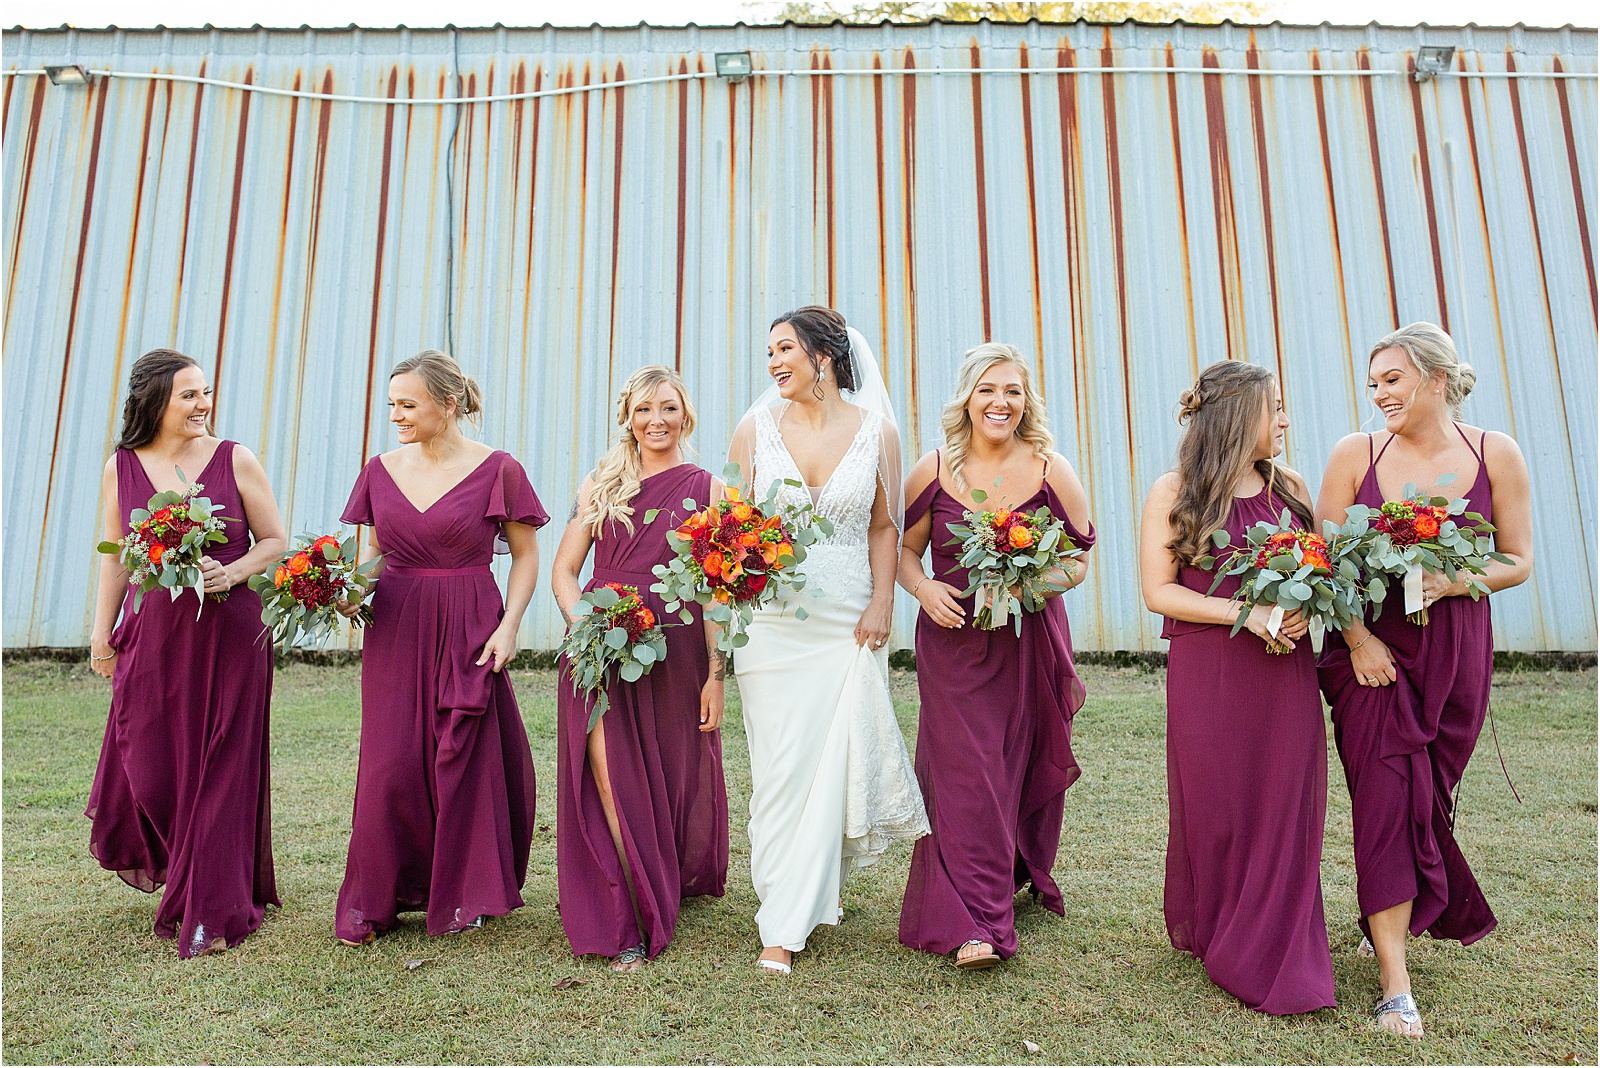 woman in wedding dress walks with bridesmaids in violet dresses